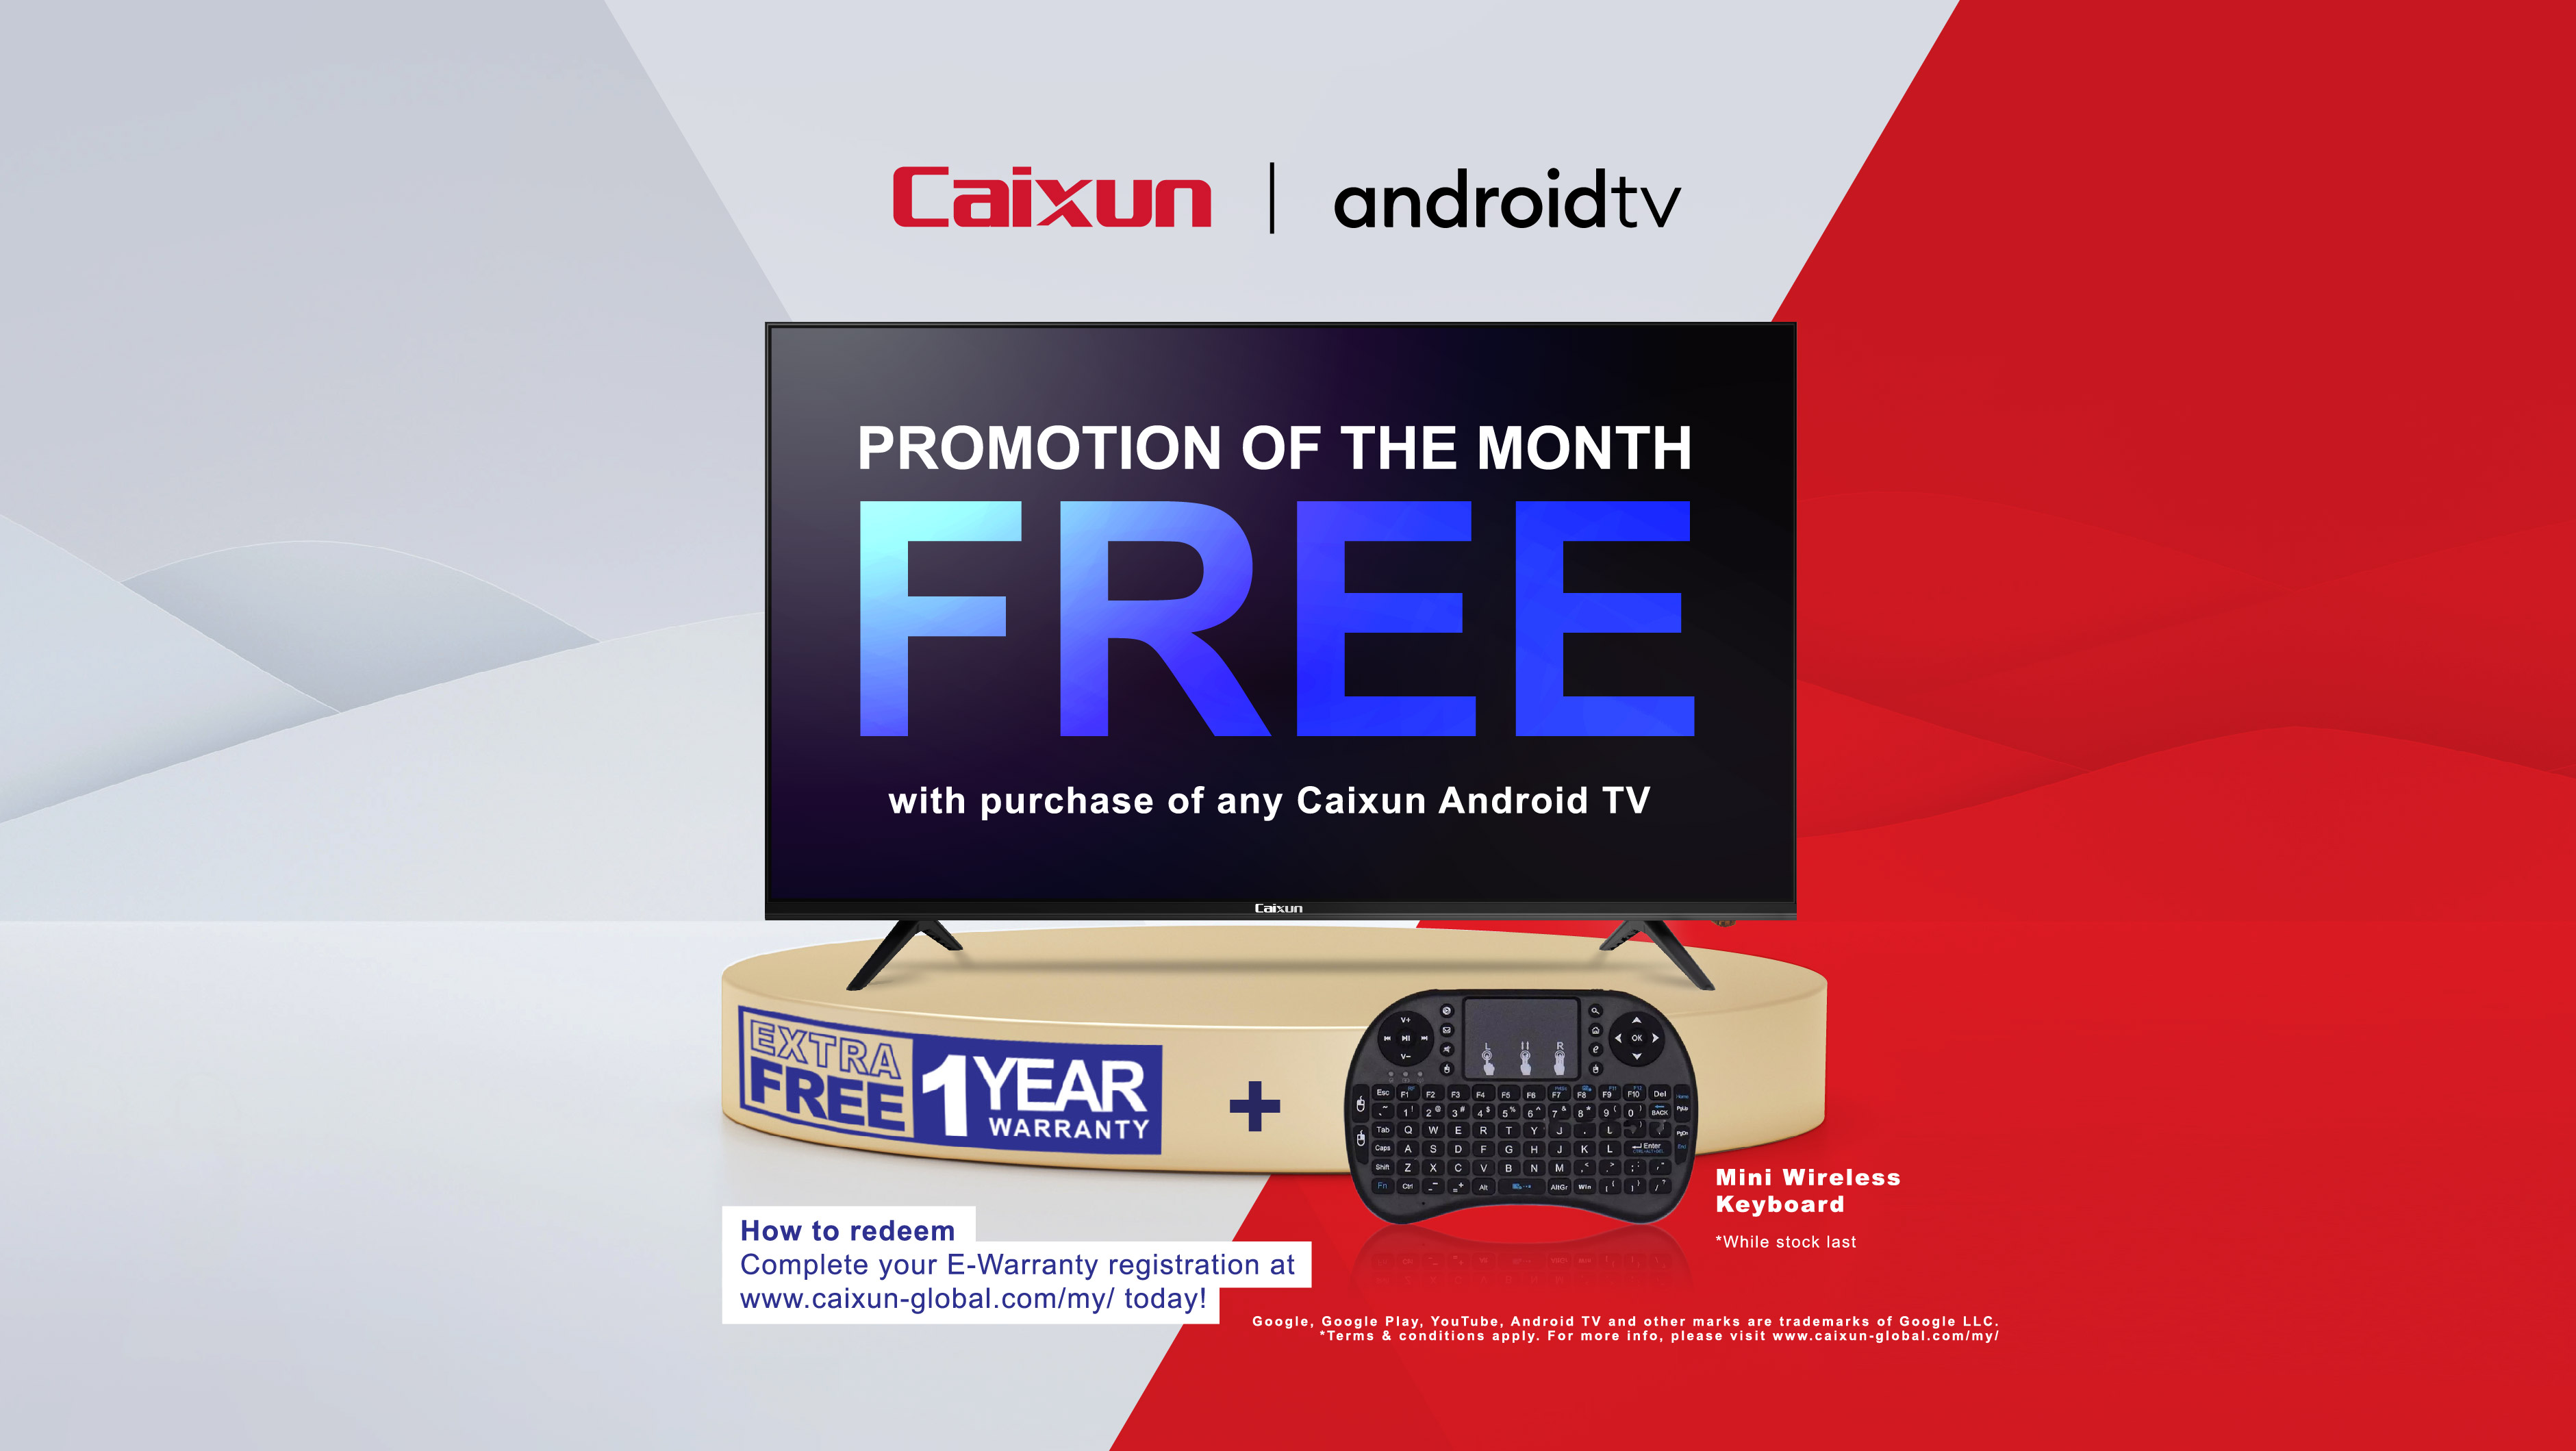 CAIXUN MALAYSIA MONTHLY PROMOTION 2022: FULL TERMS & CONDITIONS